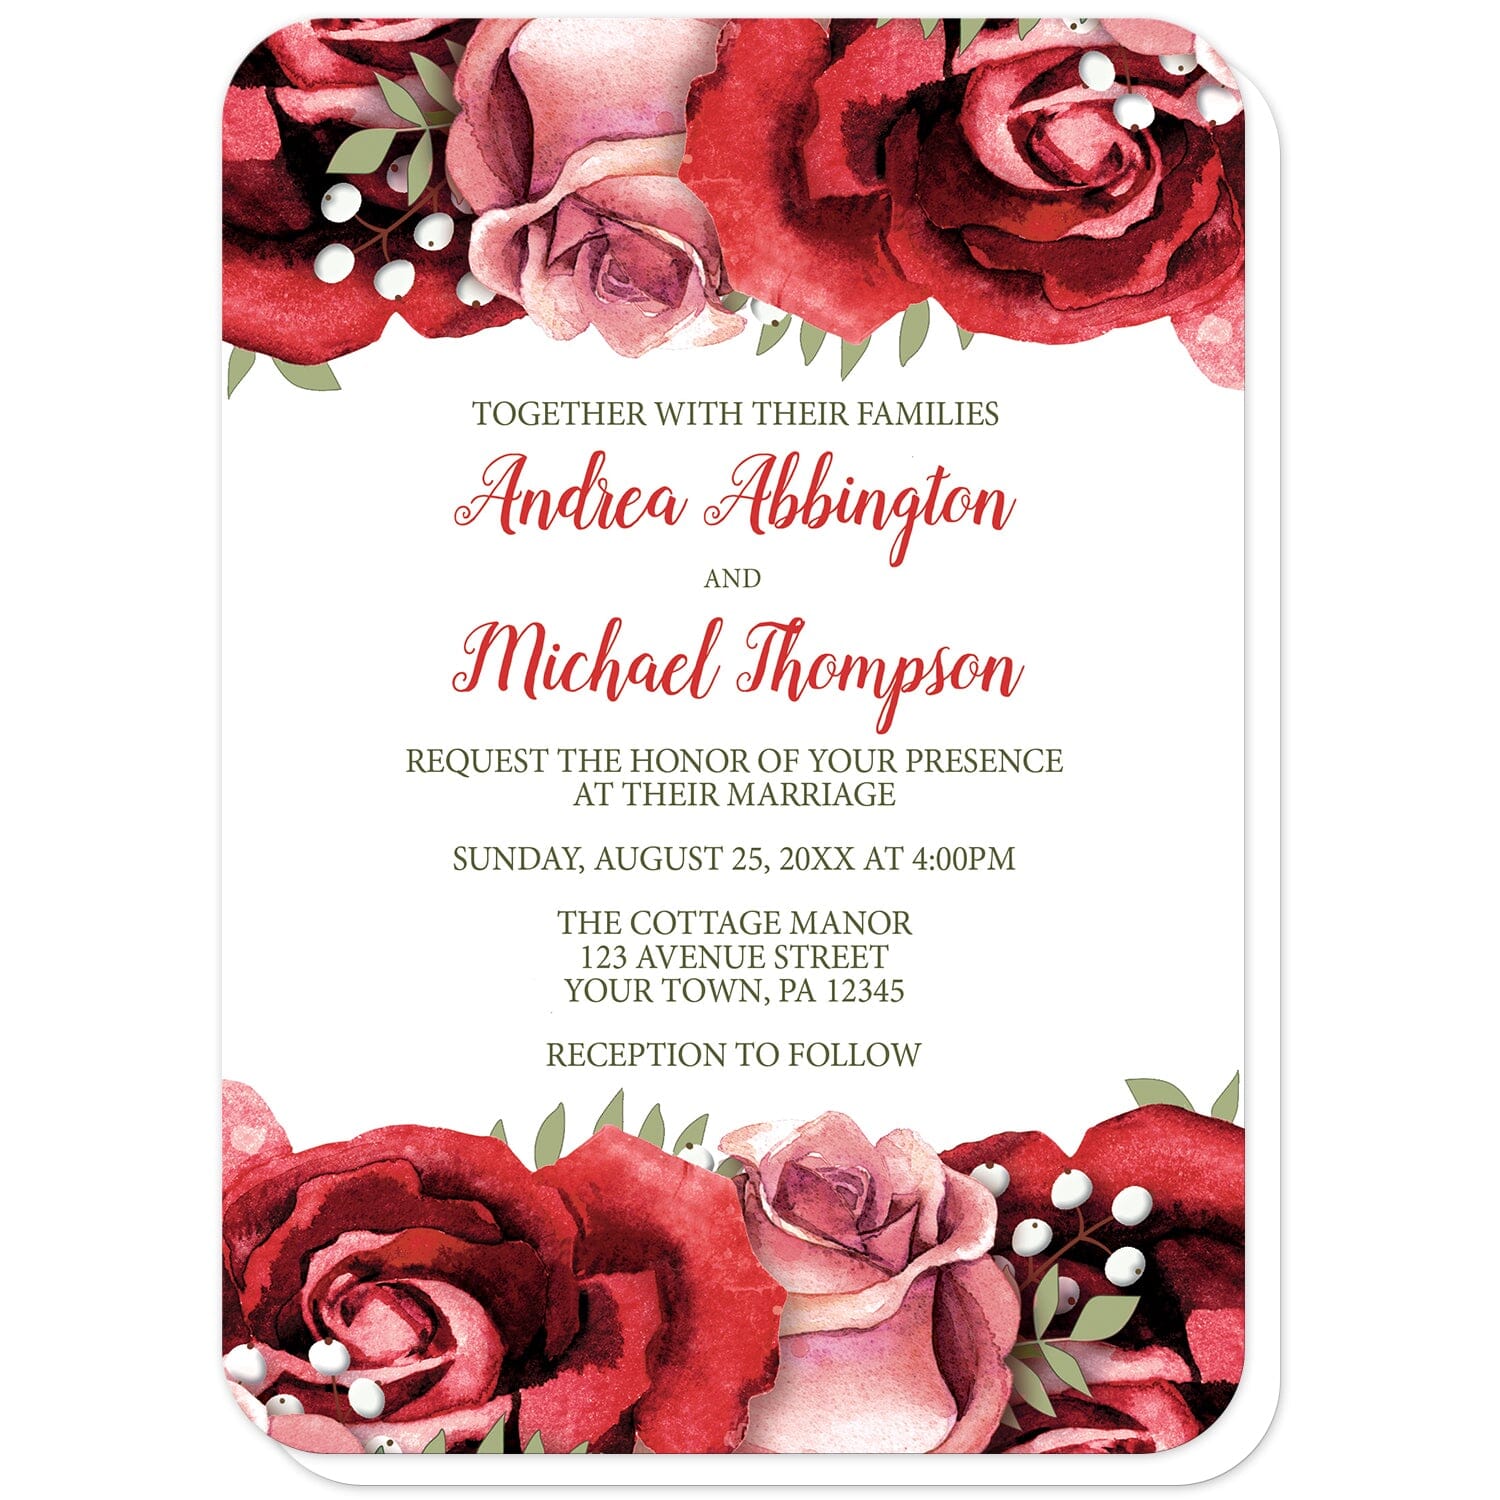 Rustic Red Pink Rose Green White Wedding Invitations (with rounded corners) at Artistically Invited. Rustic red pink rose green white wedding invitations designed with beautiful red and pink roses along the top and the bottom. Your personalized marriage ceremony details are custom printed in red and green over a white background in the center between the roses.